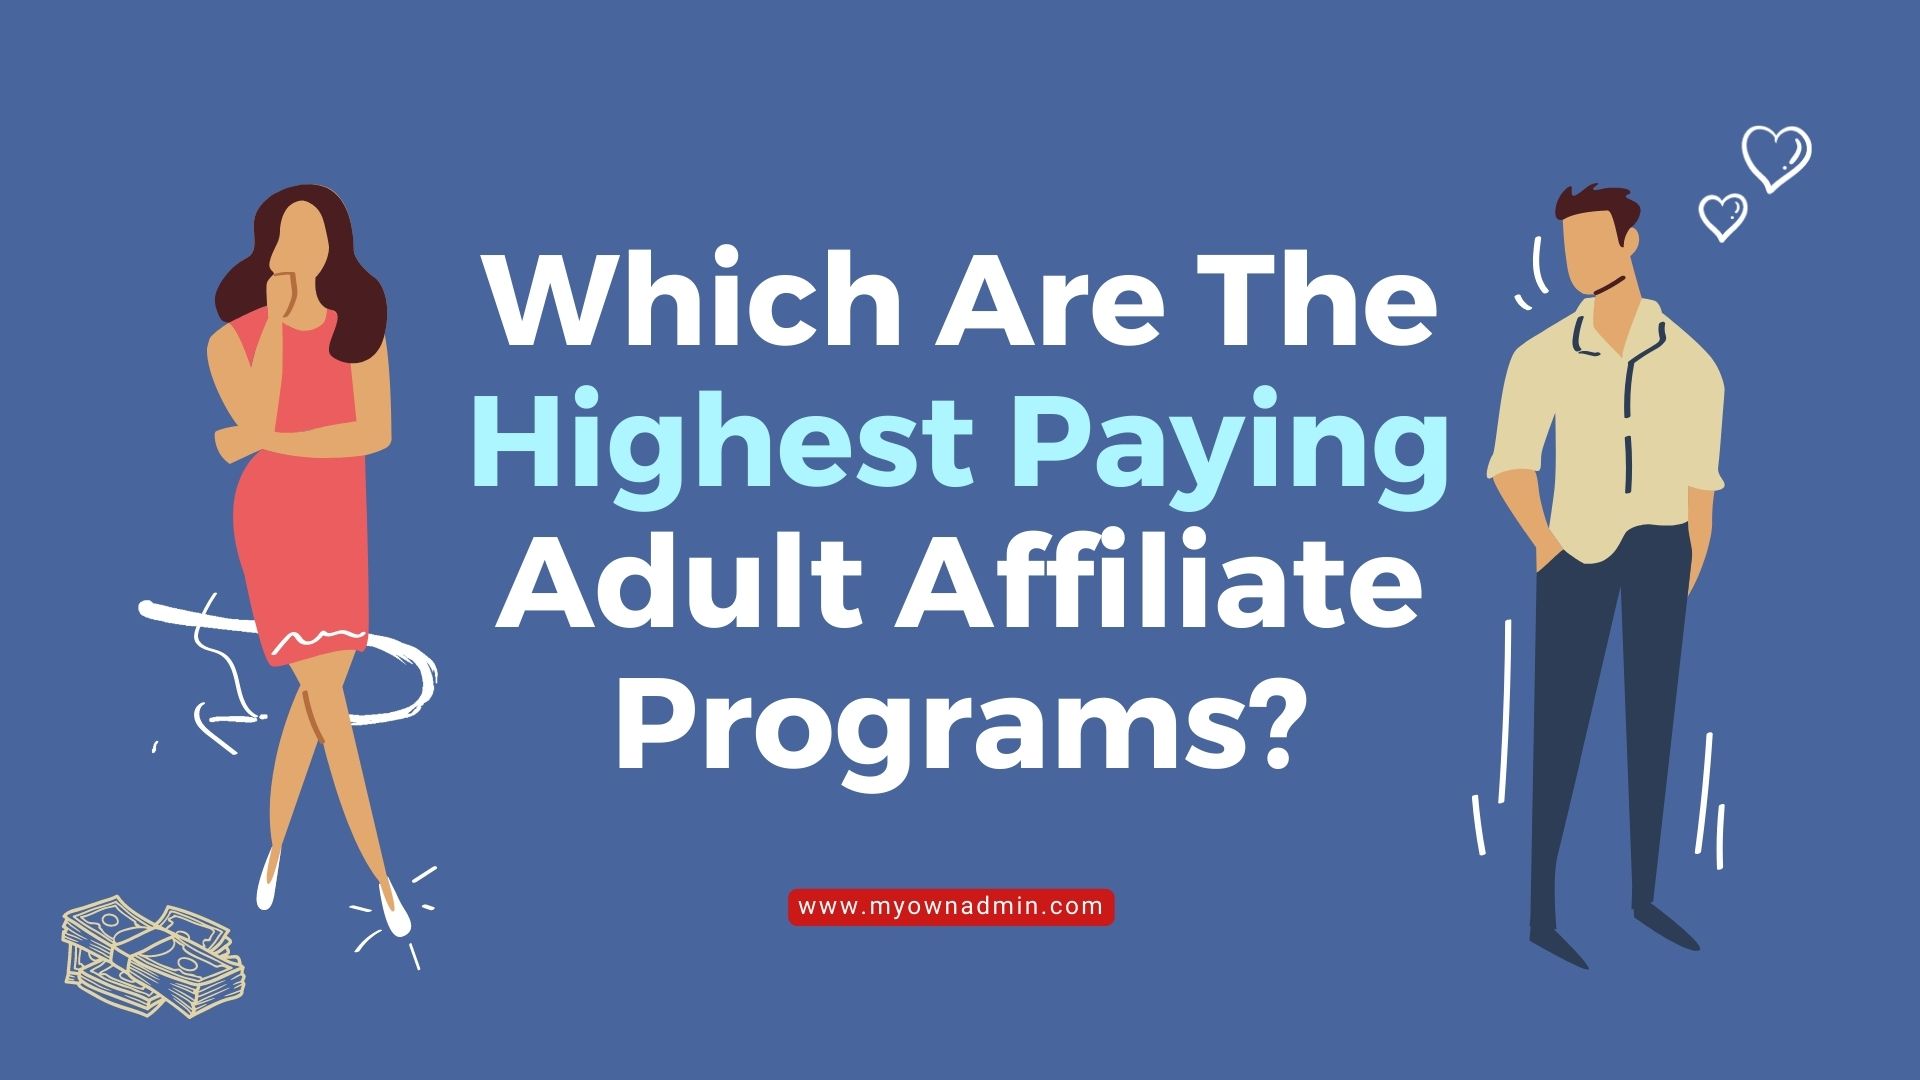 Which Are The Highest Paying Adult Affiliate Programs